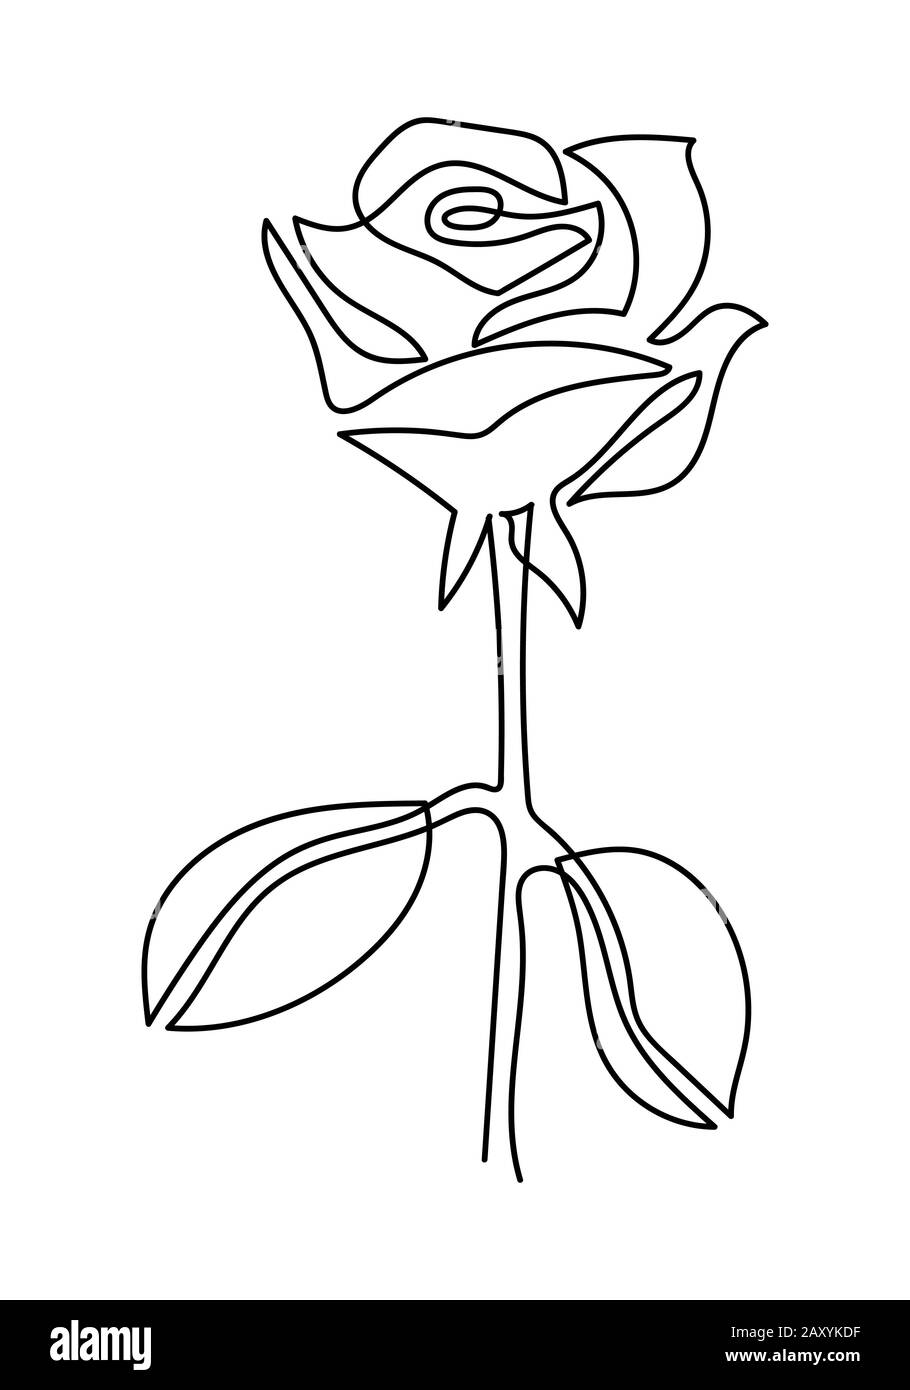 Continuous One Line Drawing Black And White Illustration One Line Of Rose Flower Art Style Isolated On White Background Stock Photo Alamy